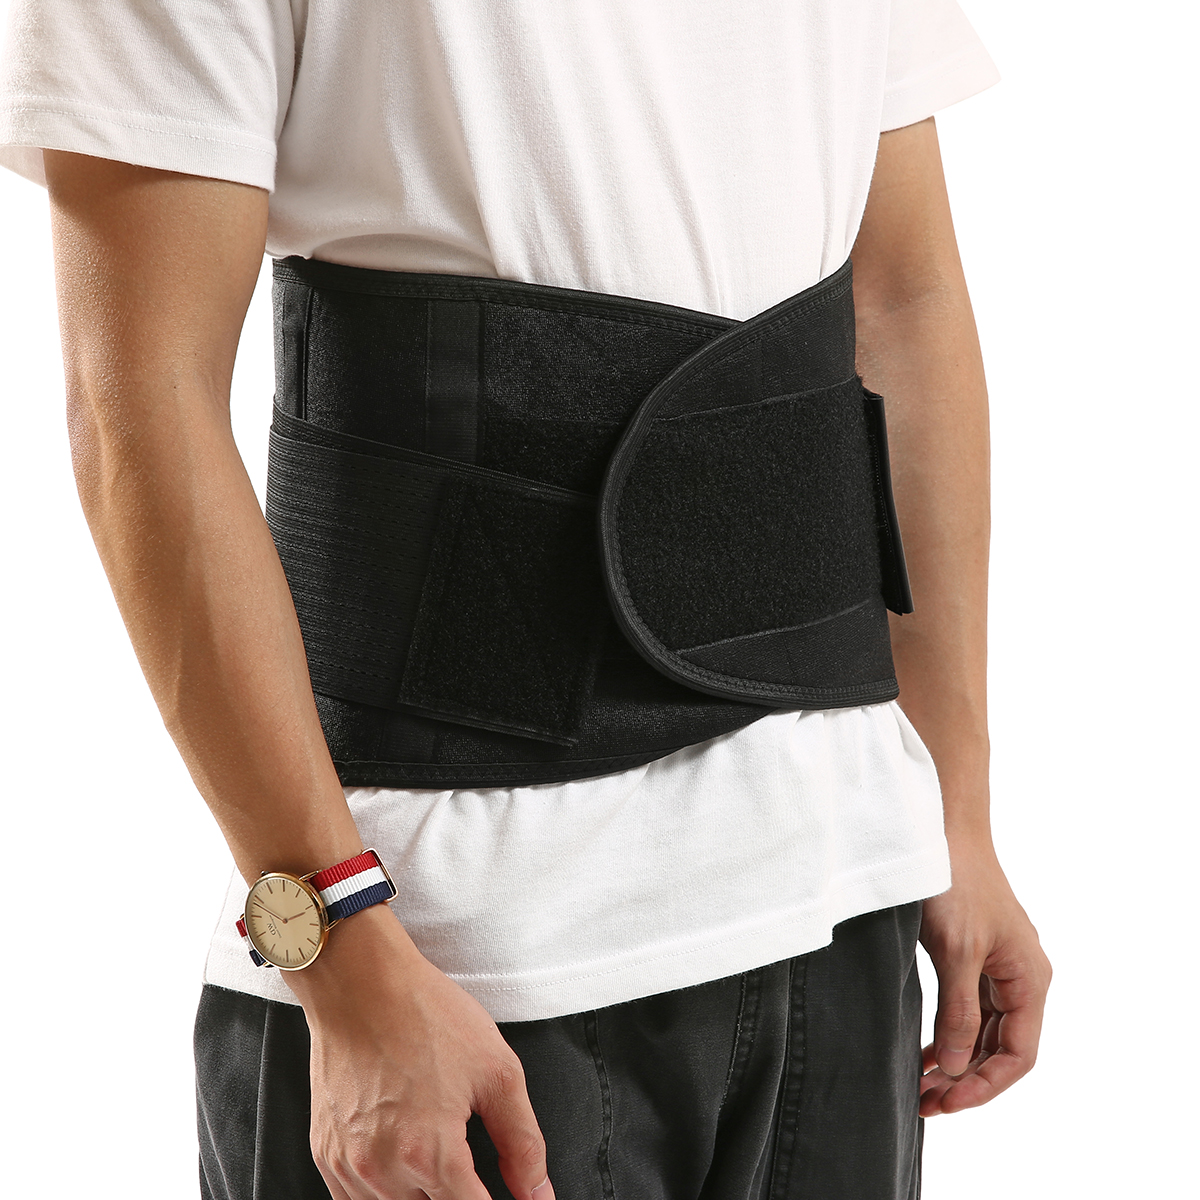 CHARMINER-Back-Support-Lumbar-Brace-Massage-Support-Belt-Dual-Adjustable-Belt-for-Pain-Relief-and-In-1884457-9